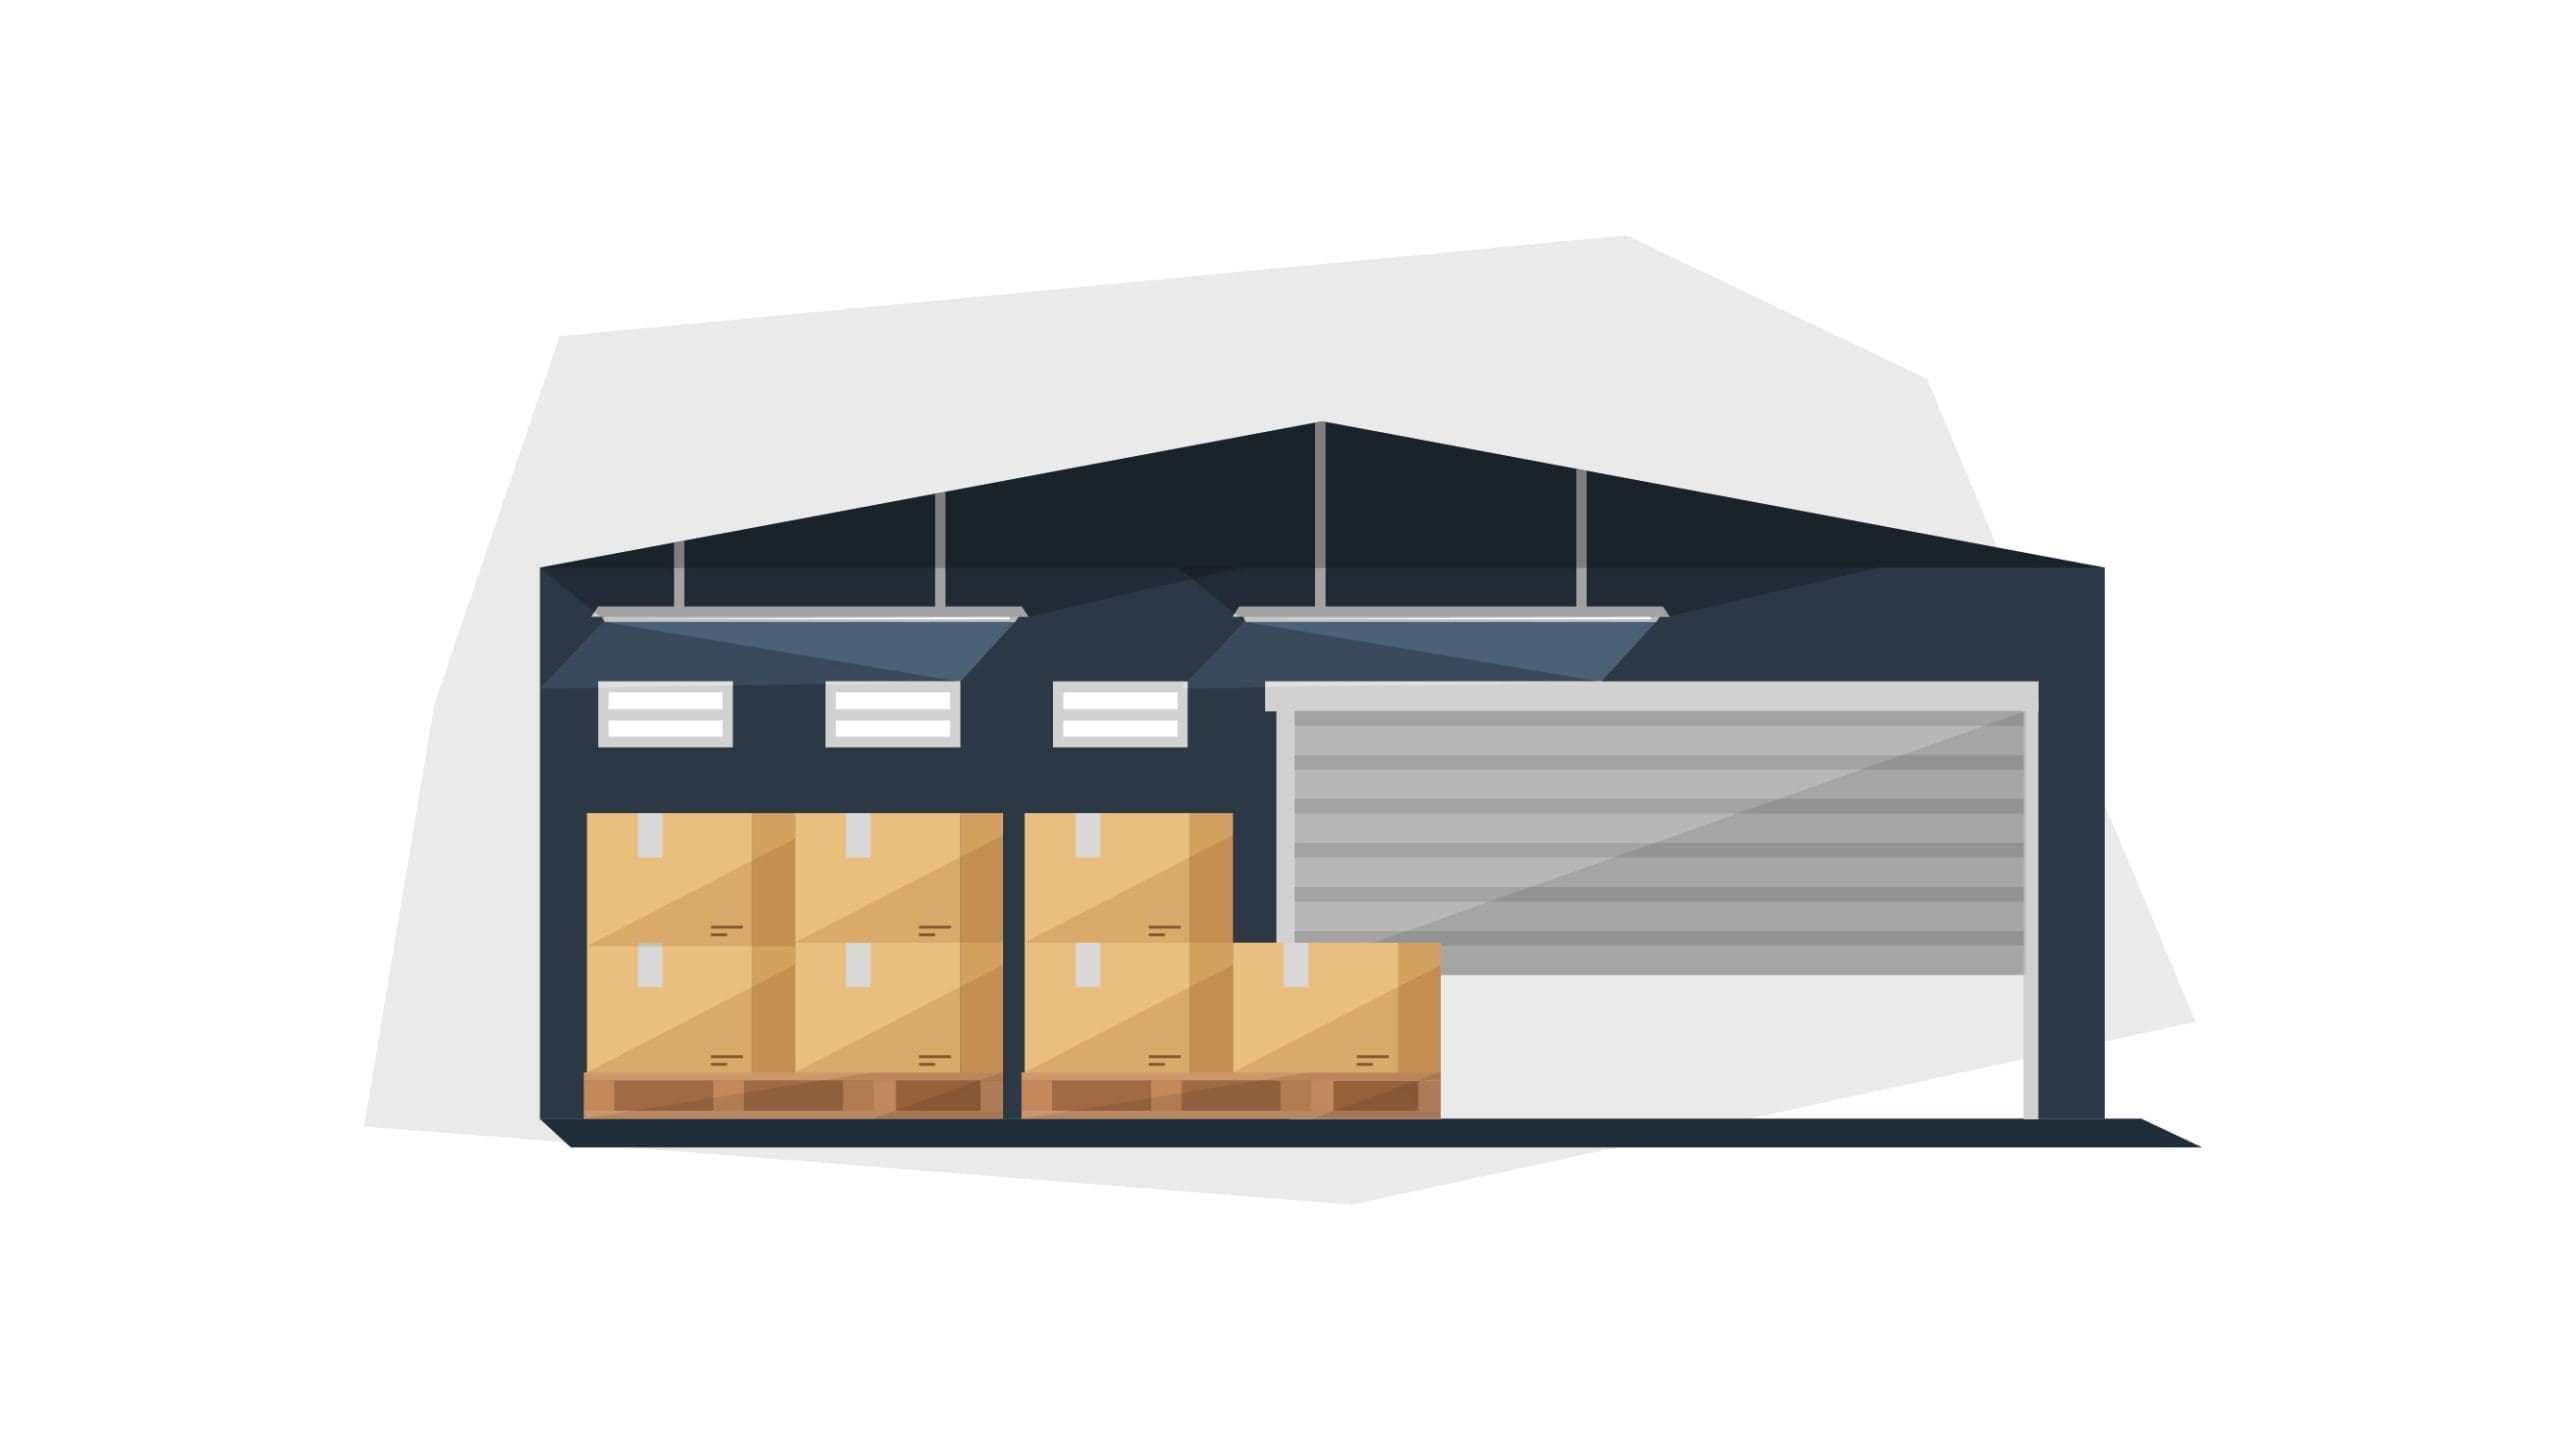 Recognize the Advantages of Multiple Small Warehouses Over One Large One